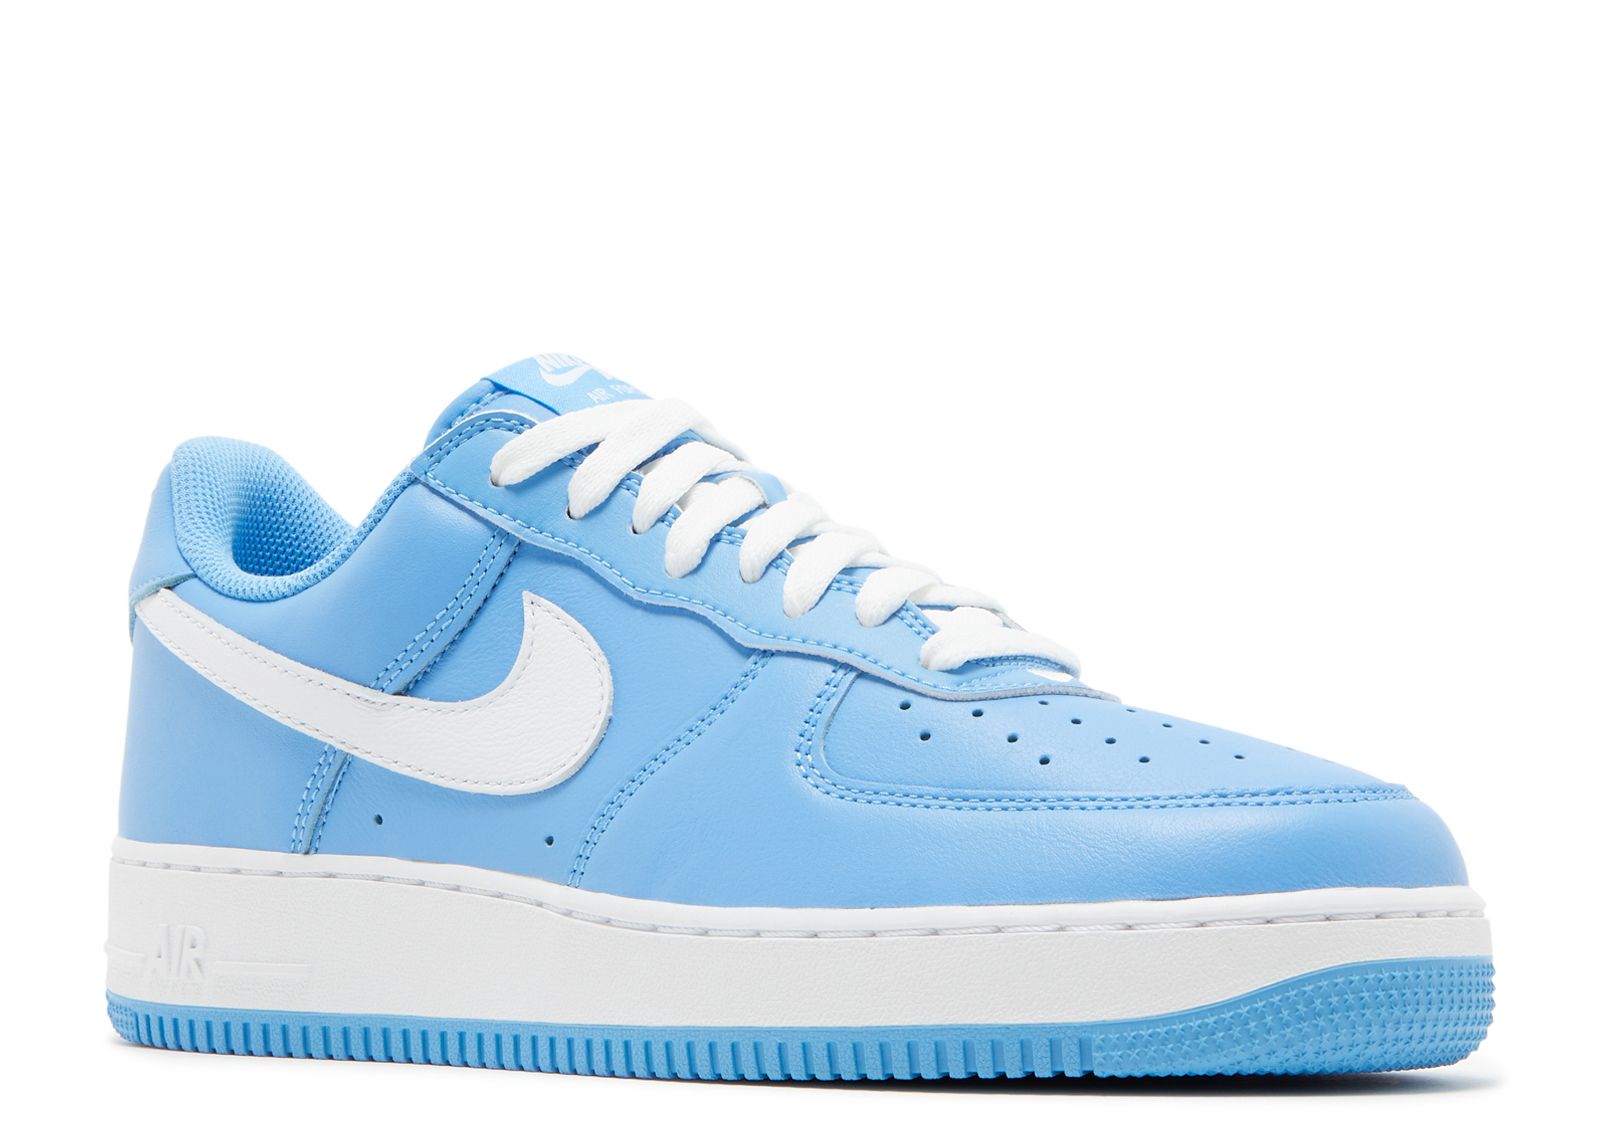 Air Force 1 Low 'Color Of Month University Blue' - Nike - DM0576 400 - blue/white/metallic gold | Club